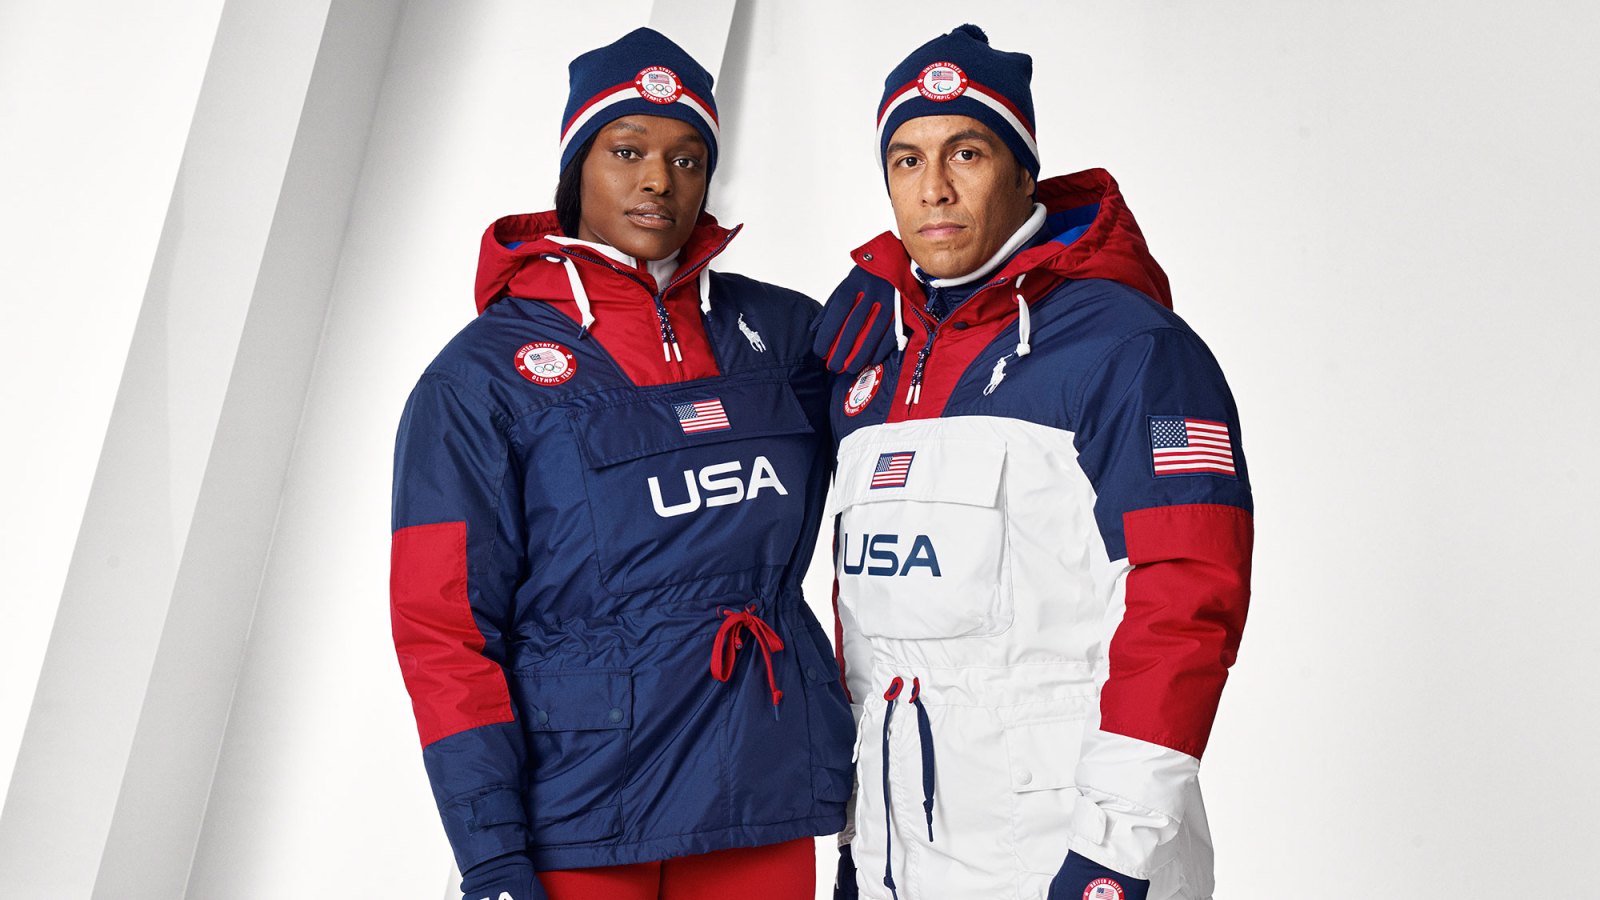 Team USAs Ralph Lauren Opening Ceremony Outfit Are Available for Purchase